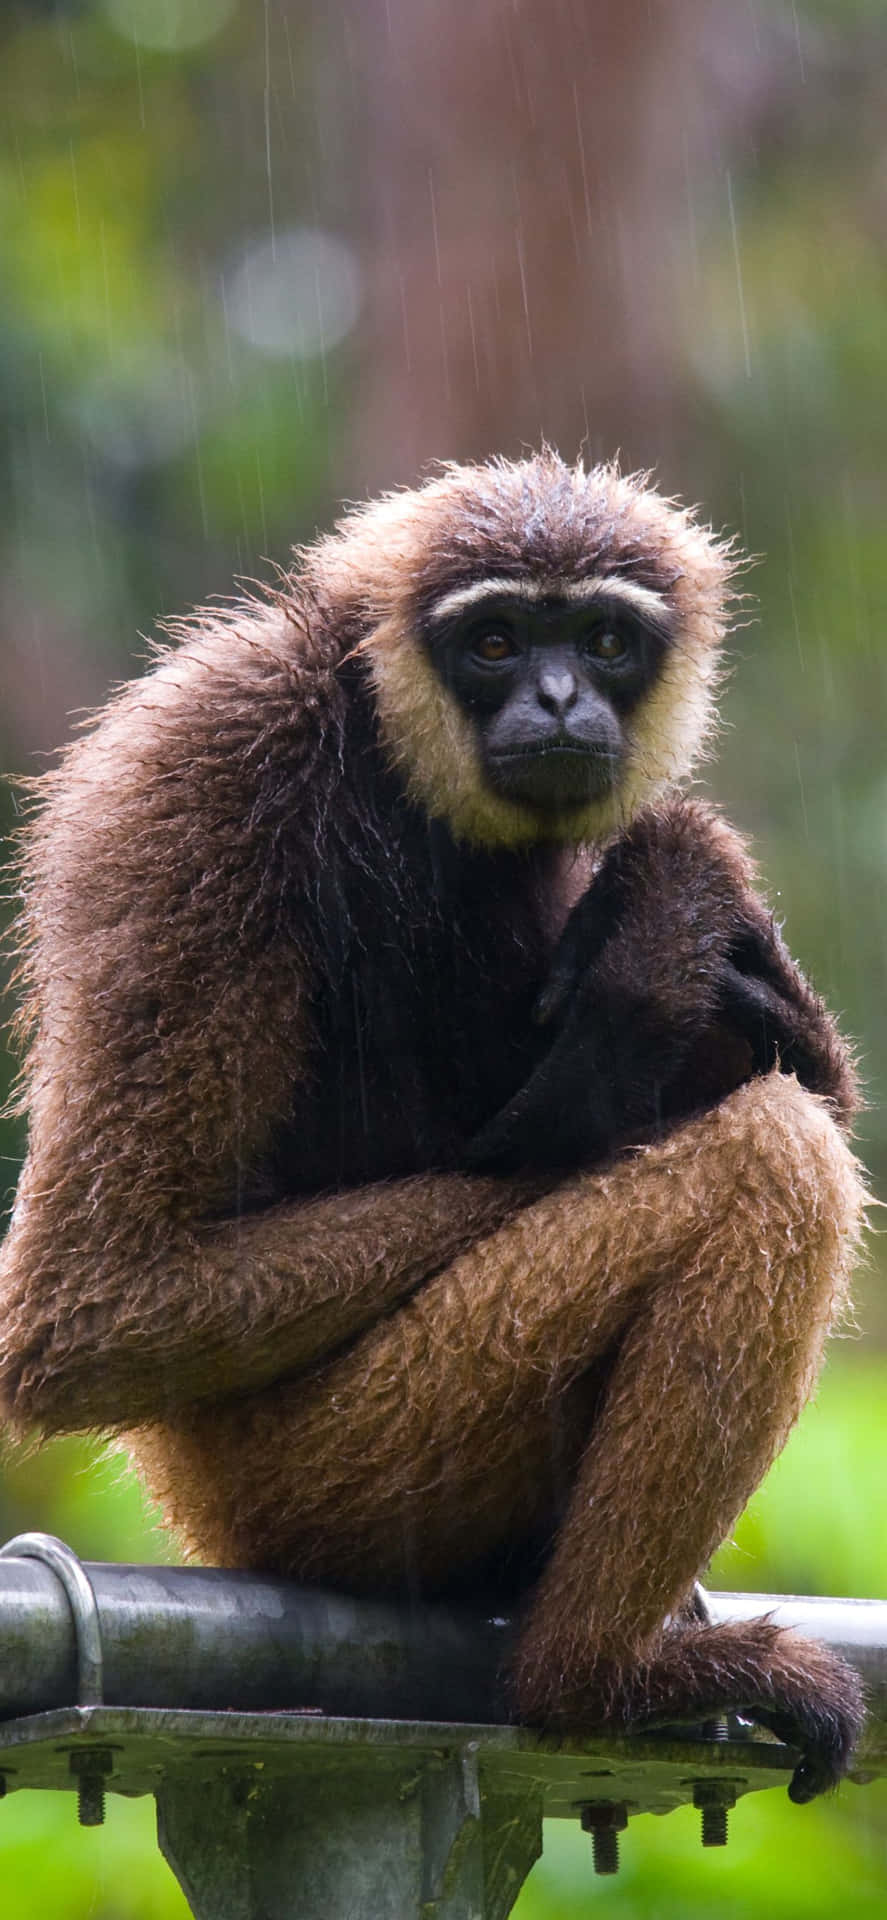 Say hello to the new Iphone Xs Max Gibbon